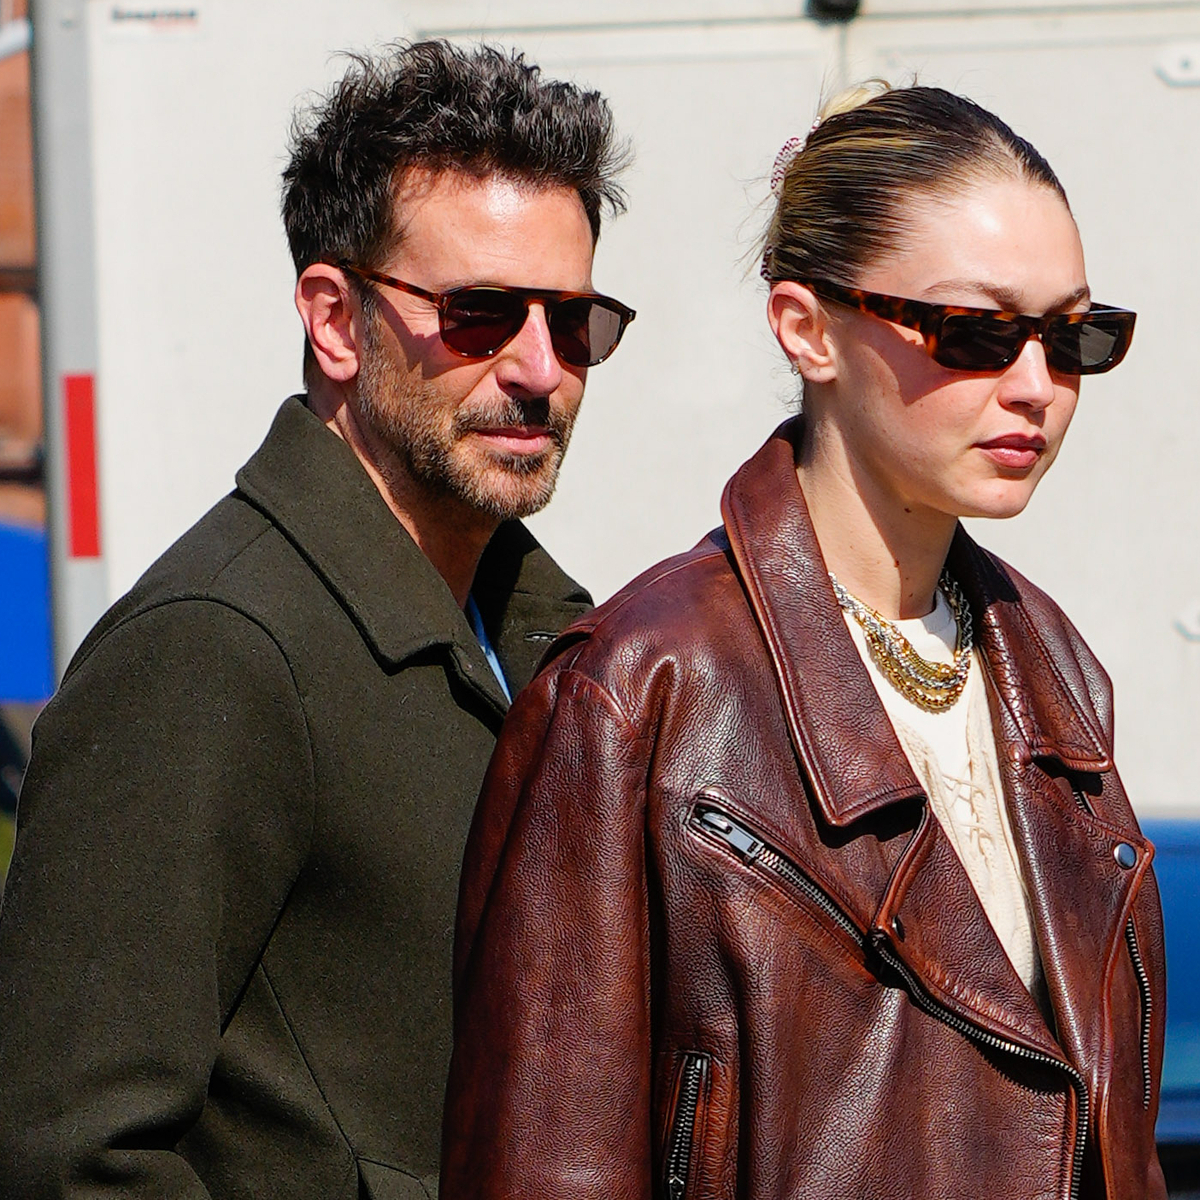 Image for article See Gigi Hadid & Bradley Cooper Cozy Up During Her Birthday Dinner  E! NEWS